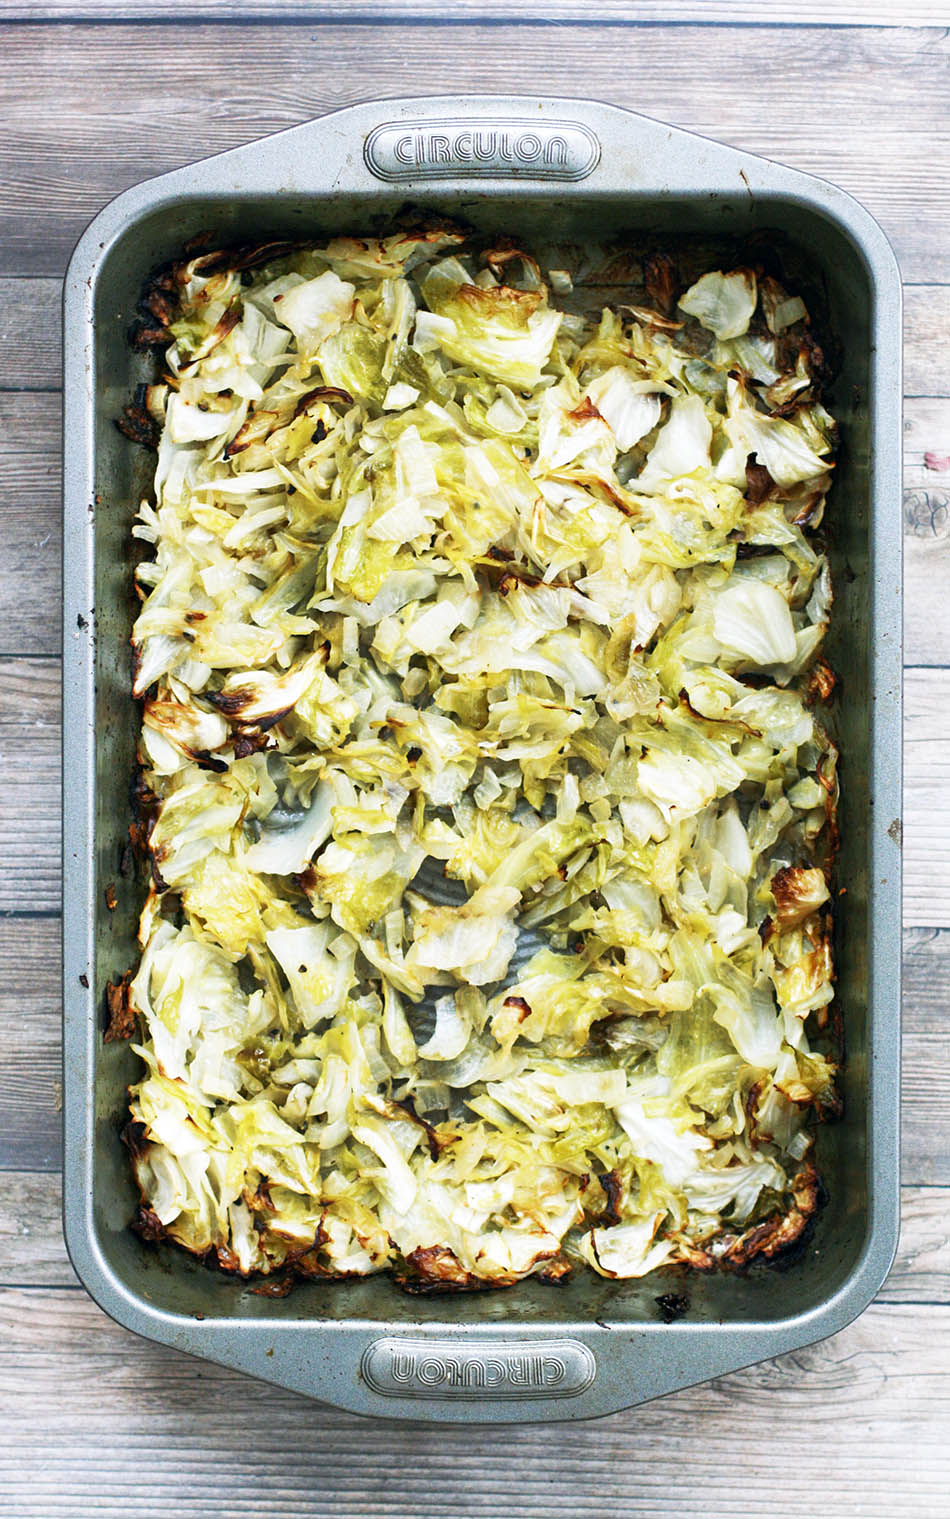 Savory roasted cabbage; Paleo, keto, gluten free, Whole30 compliant. Click through for recipe.